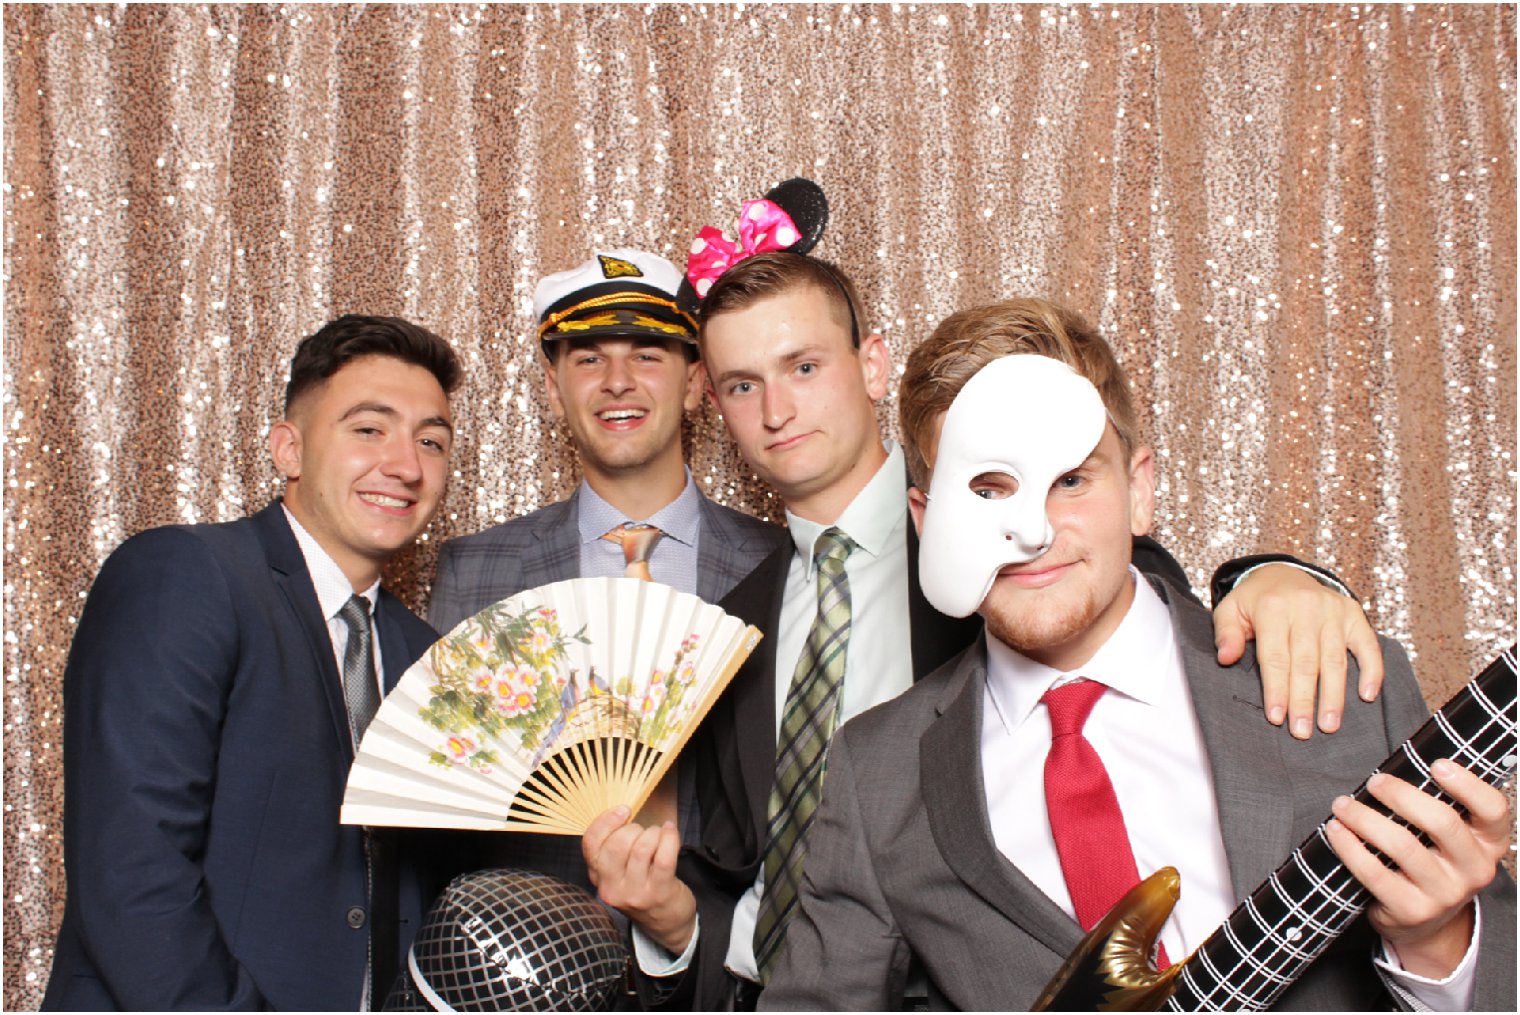 Indian Trail Club Wedding Photo Booth Pictures